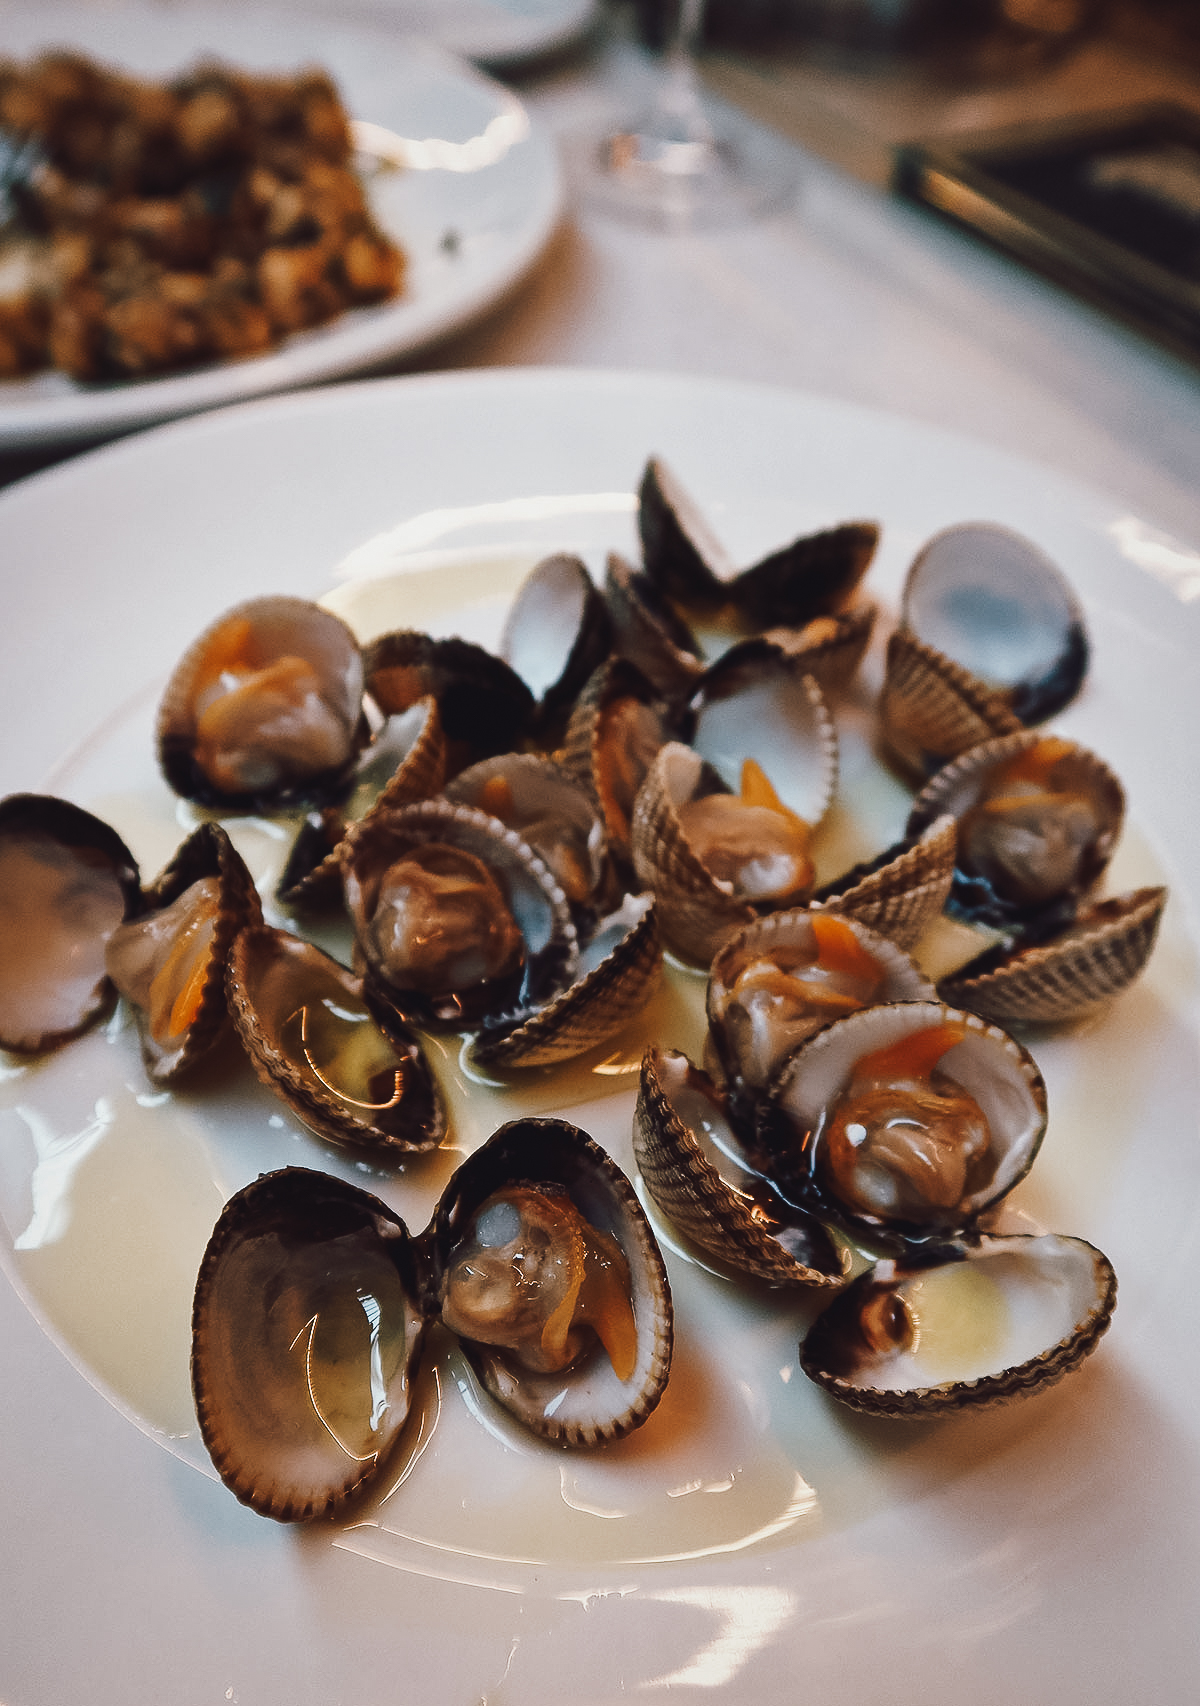 Clams at a restaurant in Barcelona